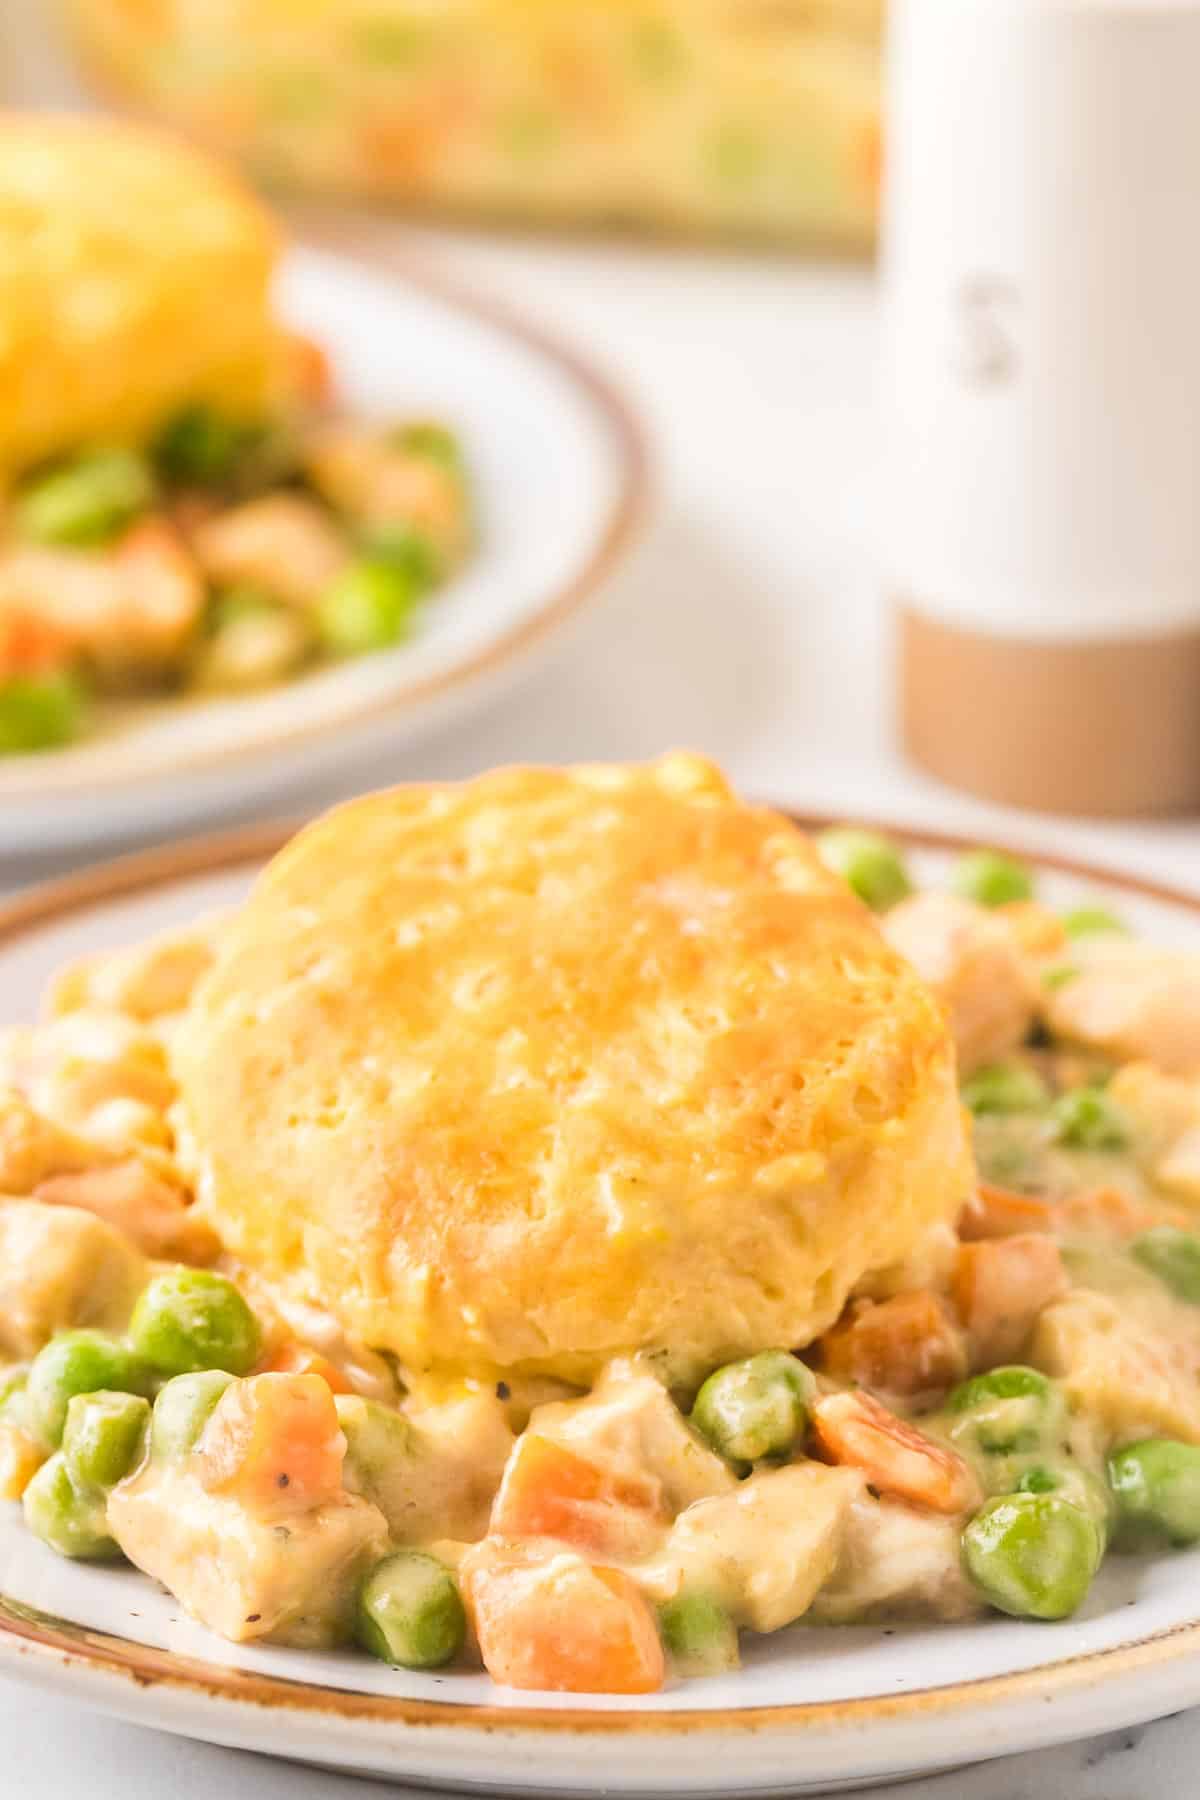 Dinner plate of chicken pot pie casserole with a biscuit on top